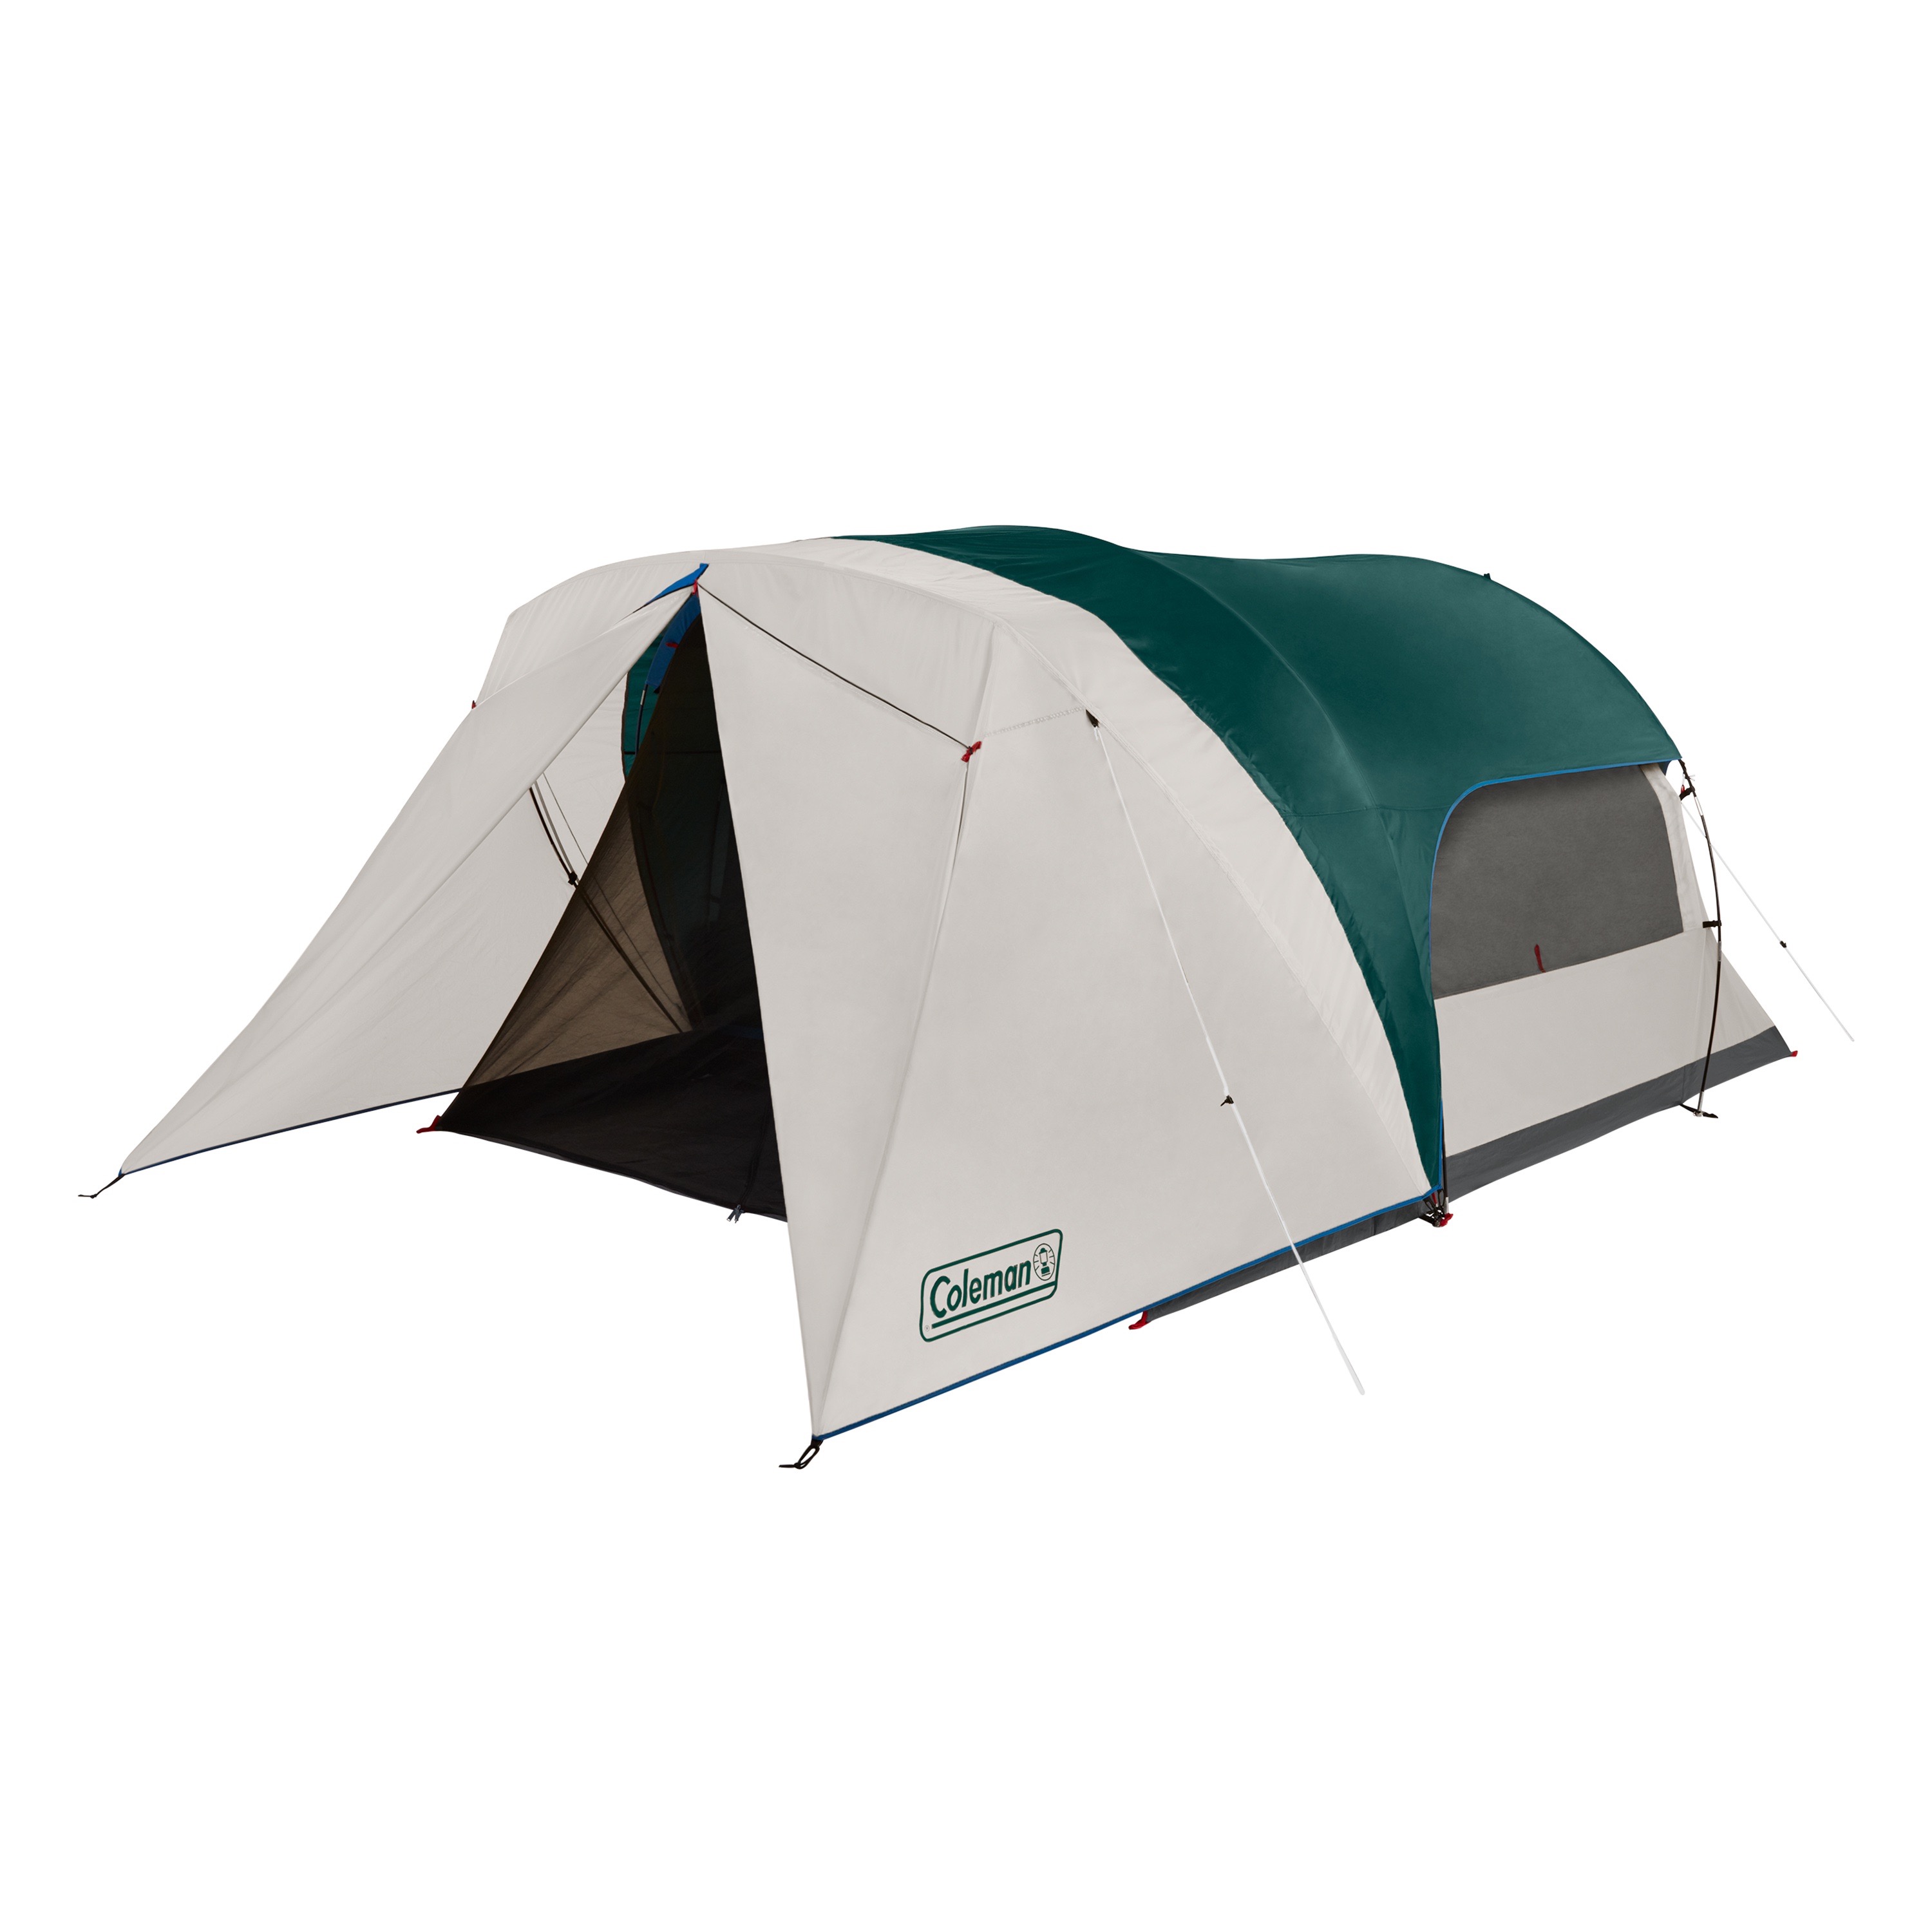 Coleman 6-Person Cabin Tent with Enclosed Screen Porch, 2 Rooms, Green - image 1 of 7